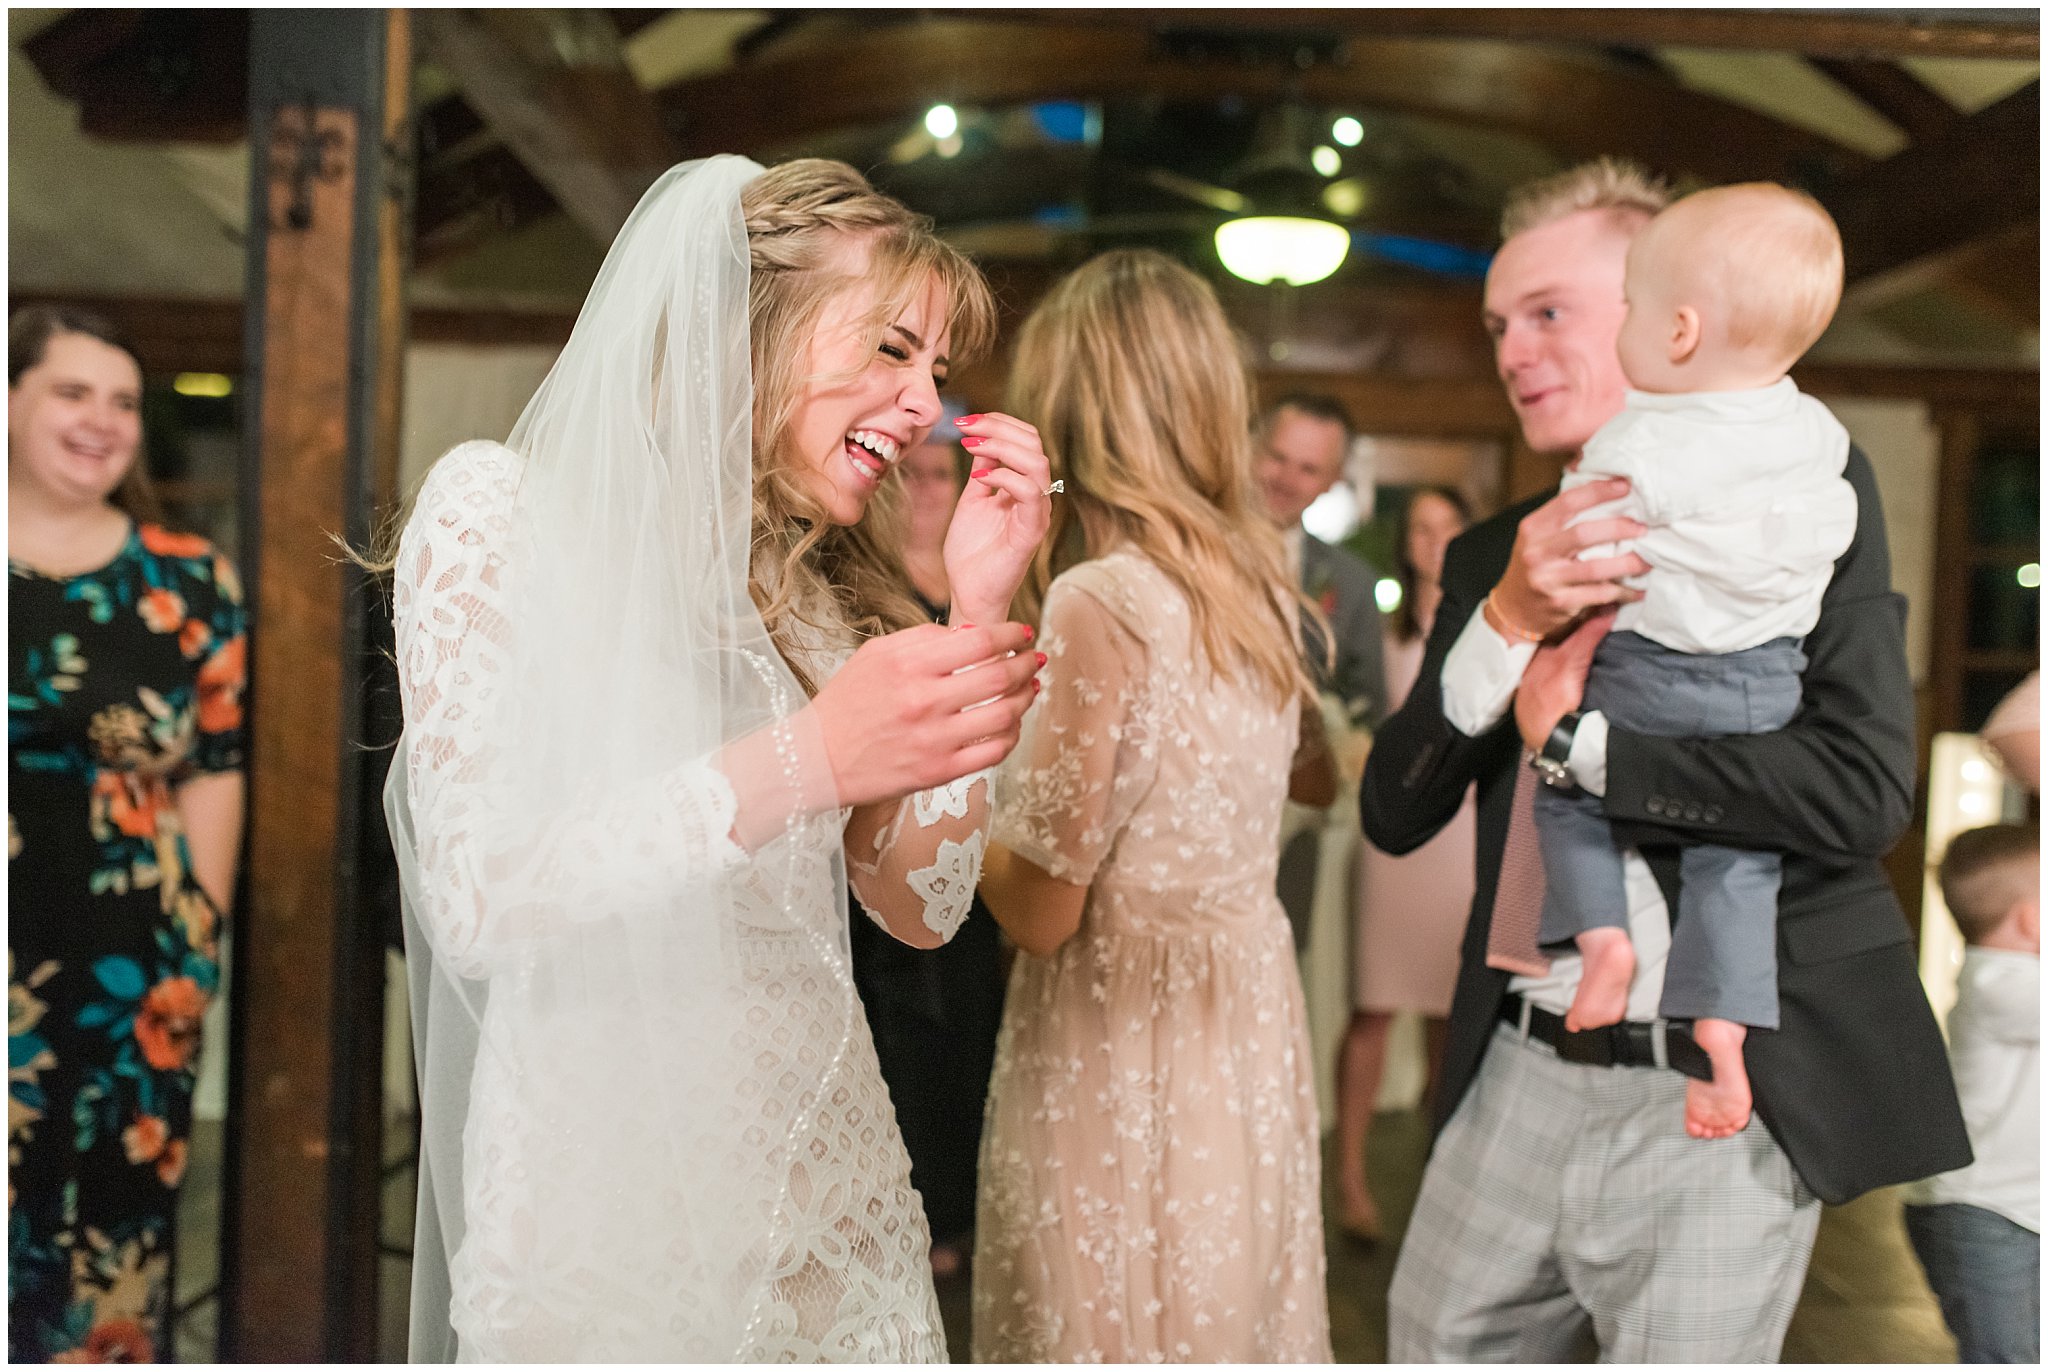 Party dancing during reception in the barn | Wadley Farms Summer Wedding | Jessie and Dallin Photography